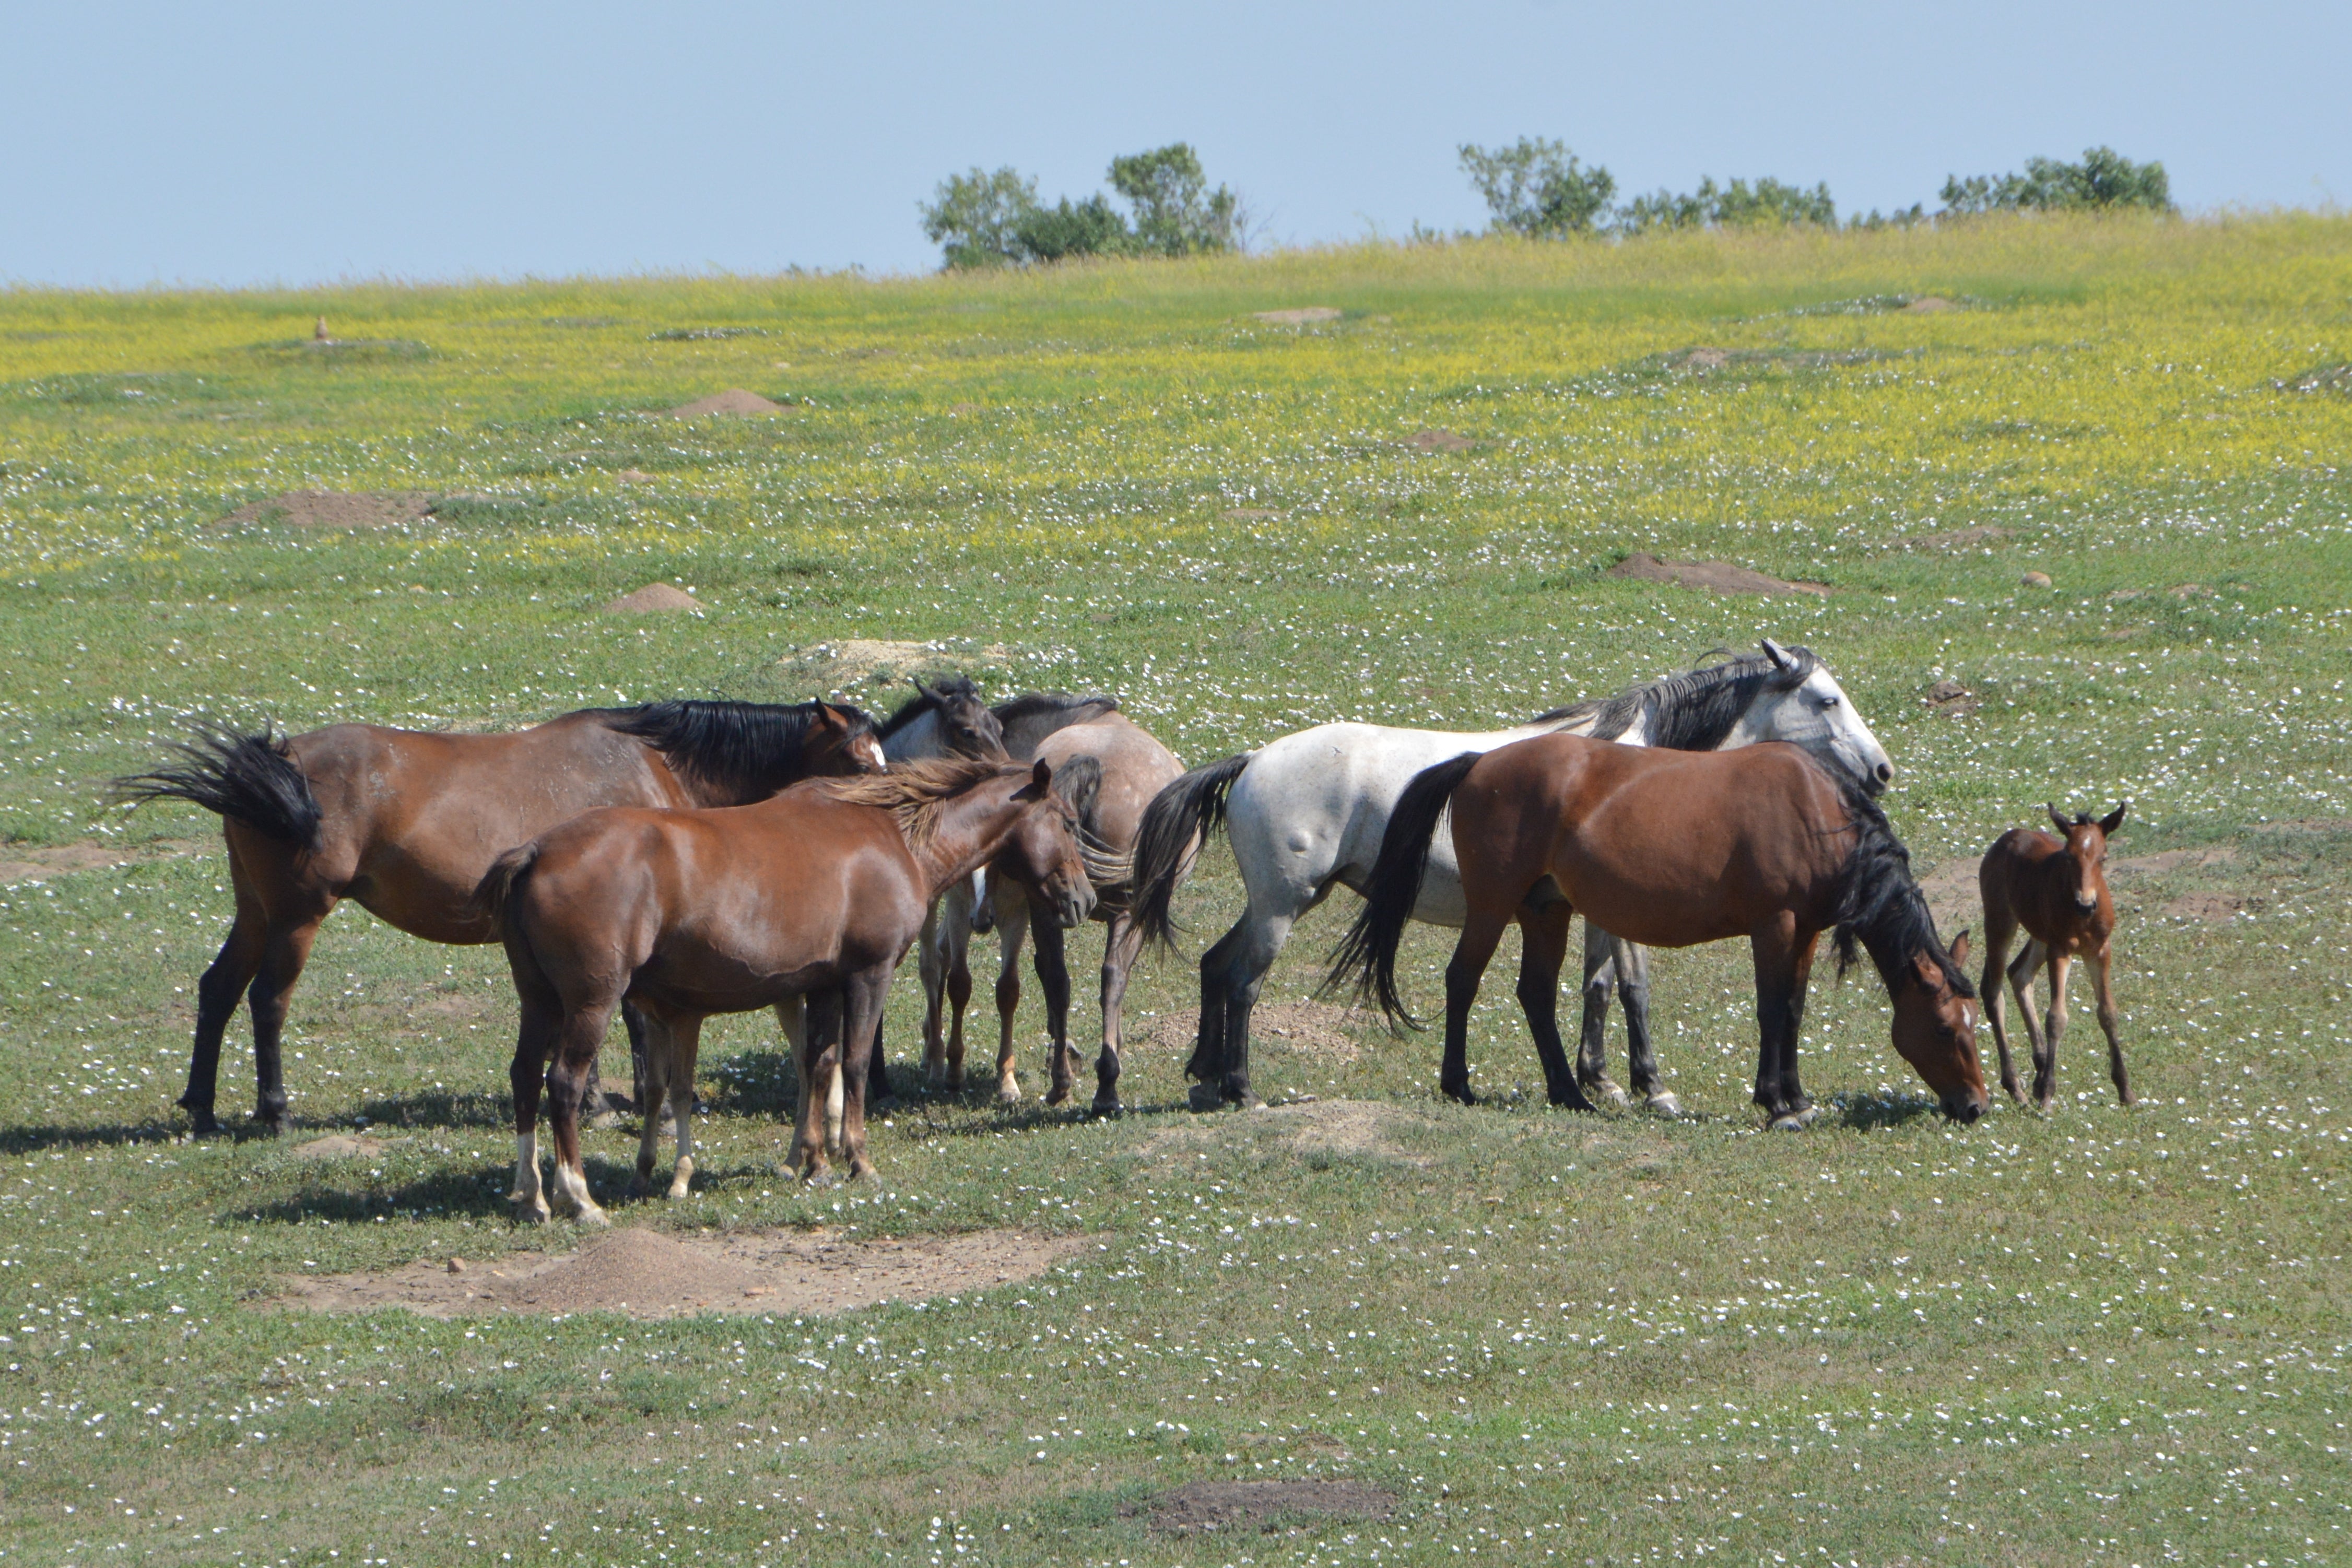 Early morning is the best time to see the wild horses